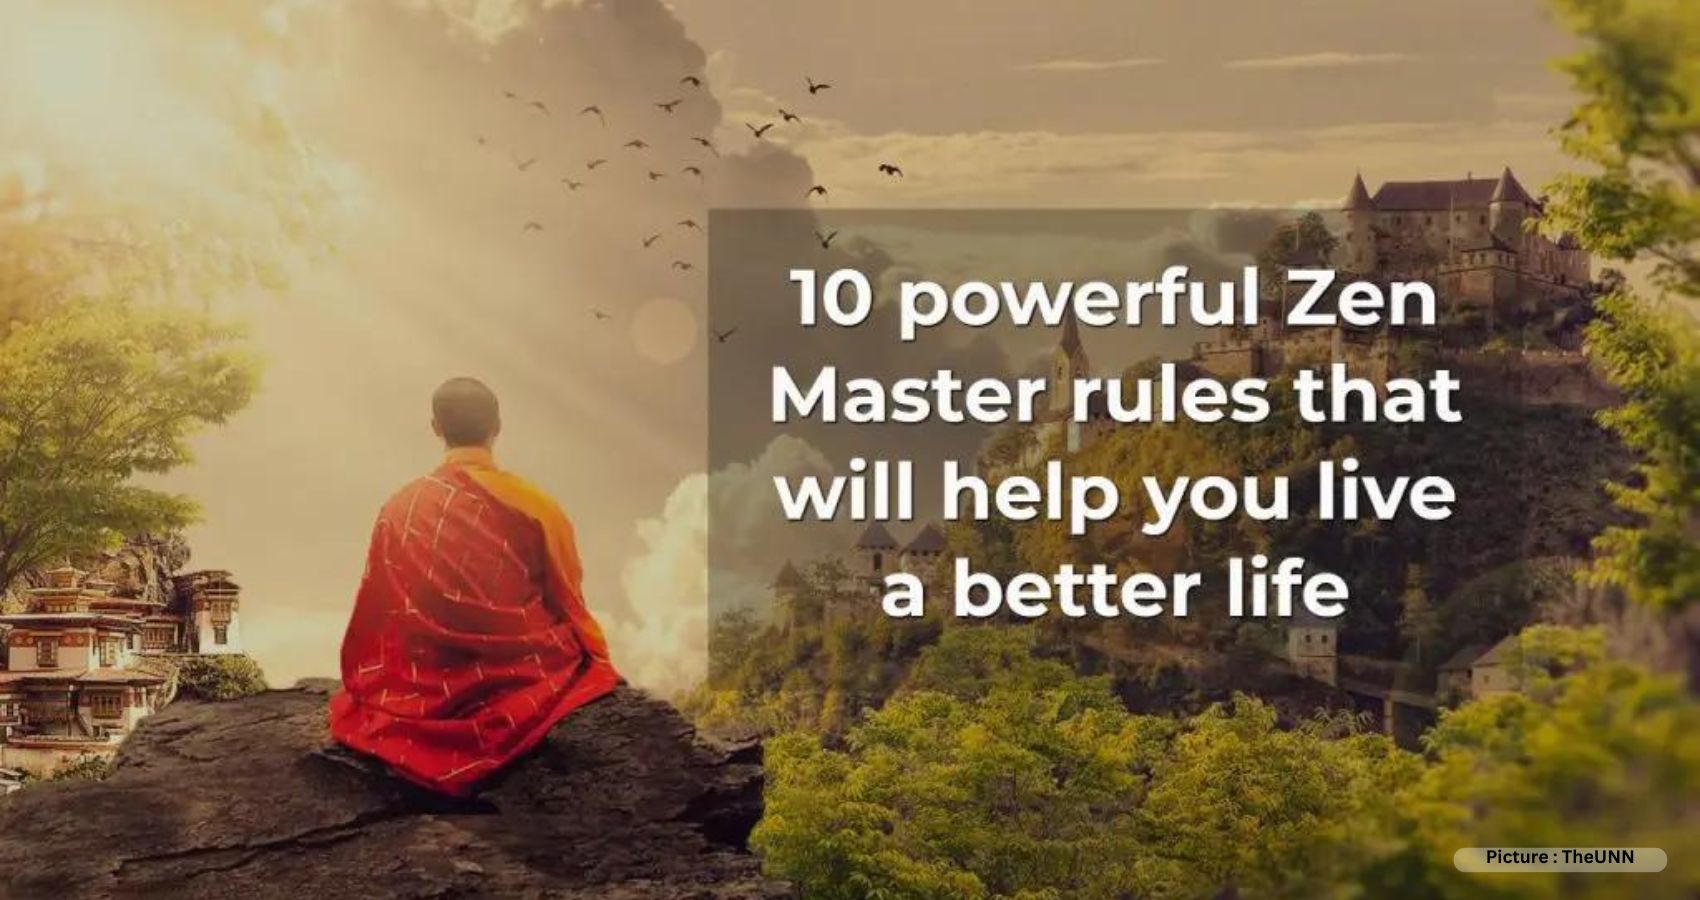 I Lived As A Monk And Studied Zen For 20 Years—Here’s The No. 1 Thing People Miss When They Talk About Happiness